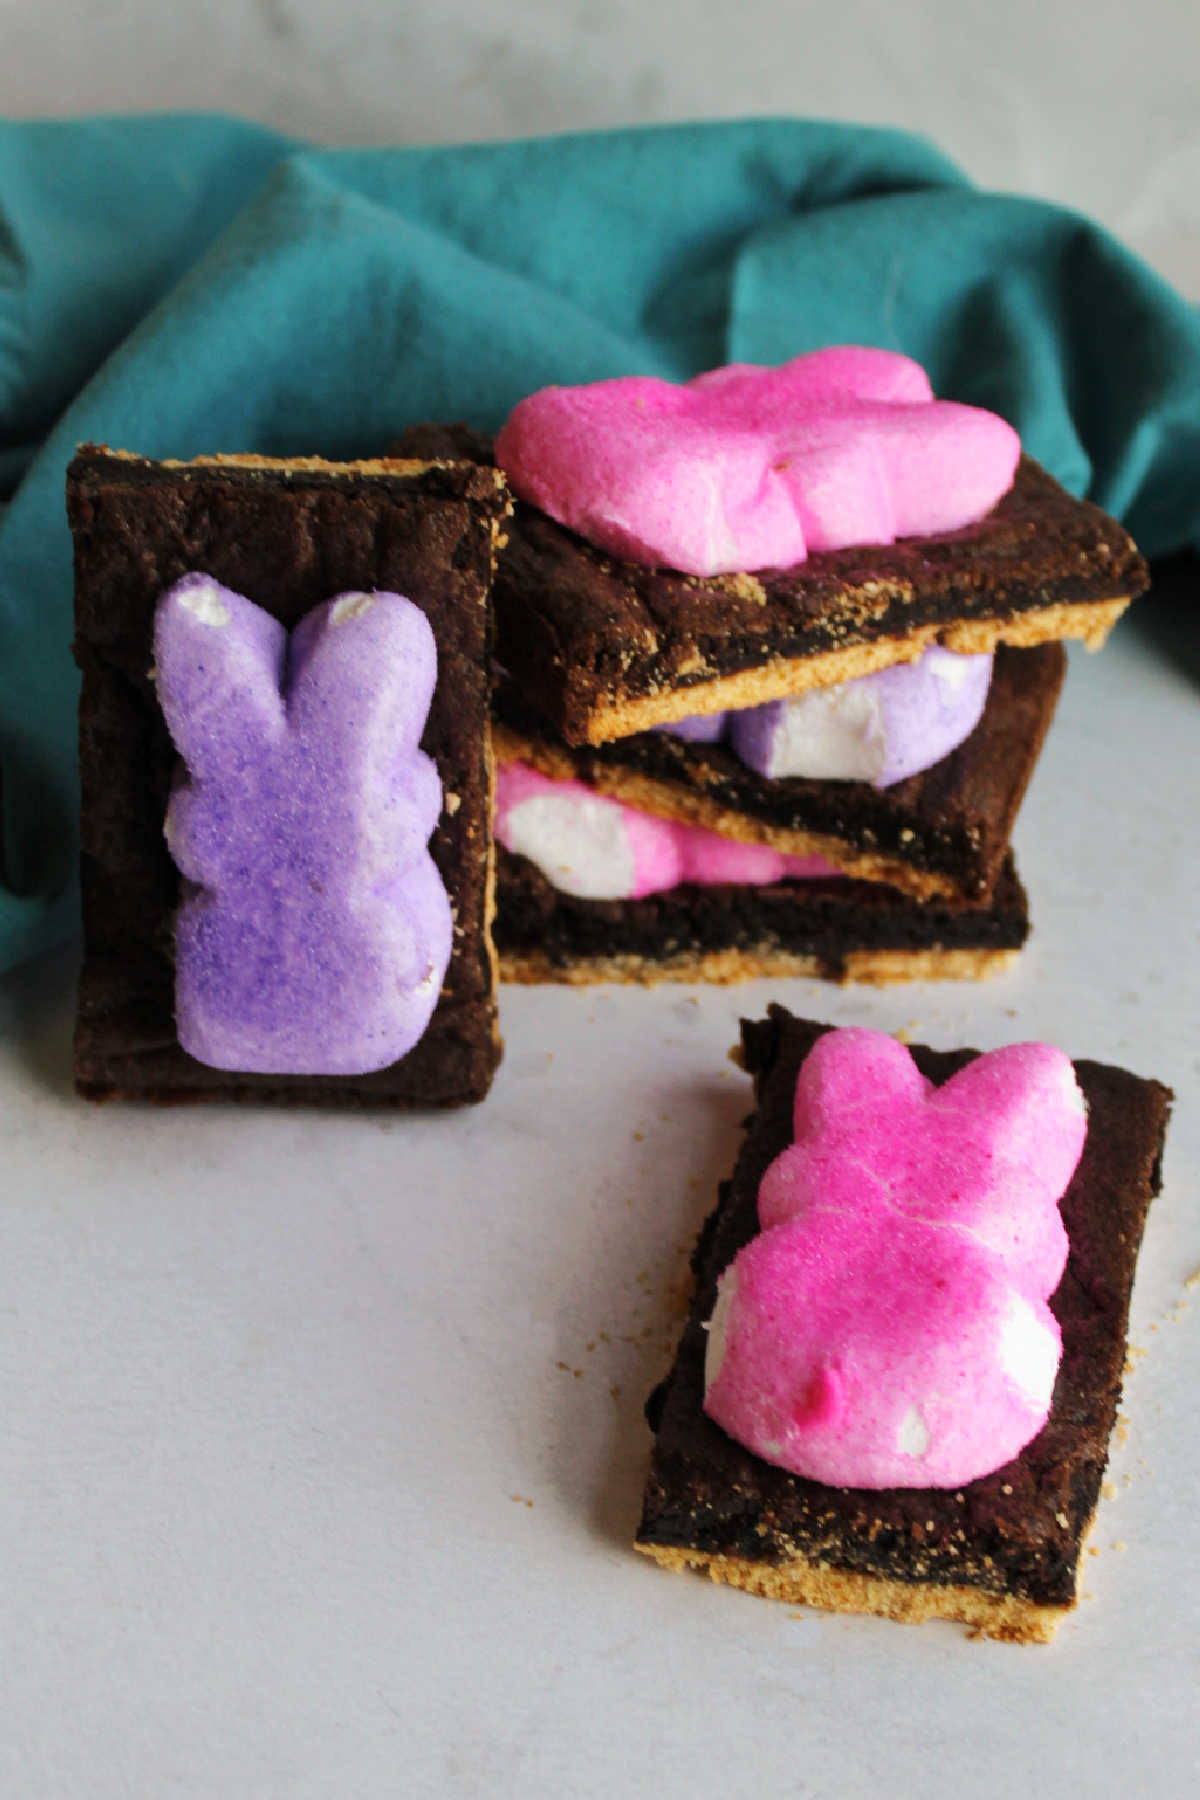 Chocolate cake mix s'mores bars topped with pink and purple peeps bunnies, ready to eat.